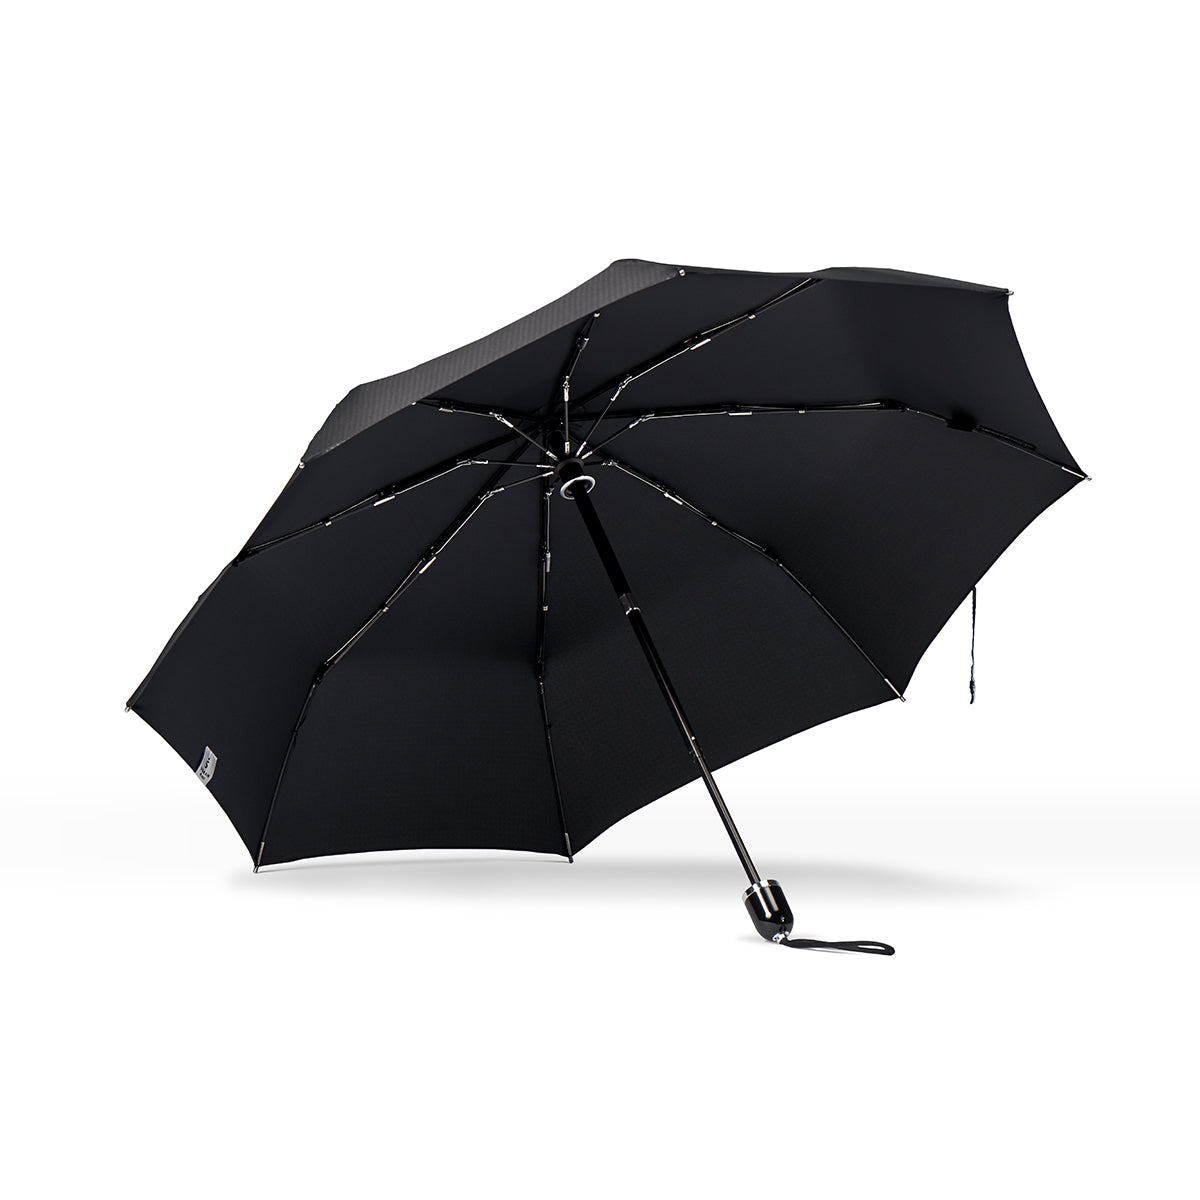 underside view of a handmade manual open compact luxury umbrella with a glossy piano finish black handle, detachable waxed cotton wrist strap, Teflon-coated fine denier woven black polyester twill canopy, chrome trim, Trilobe aircraft aluminum shaft, fiberglass ribs, and a reflective strap embroidered with “ShedRain Stratus.”